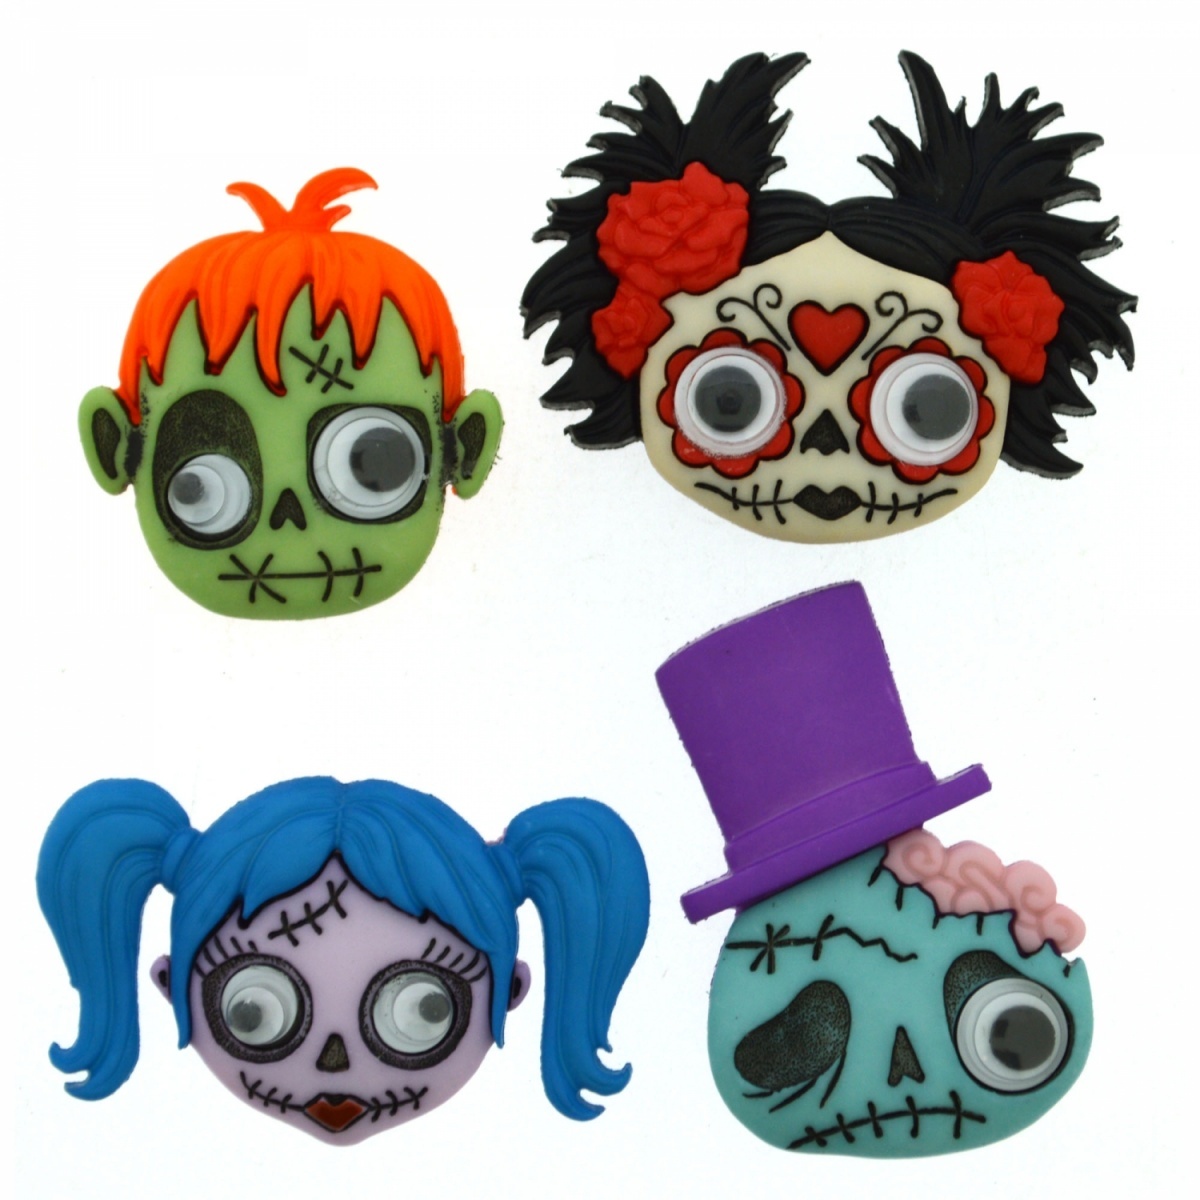 Zany Zombies Set of Decorative Buttons фото 1